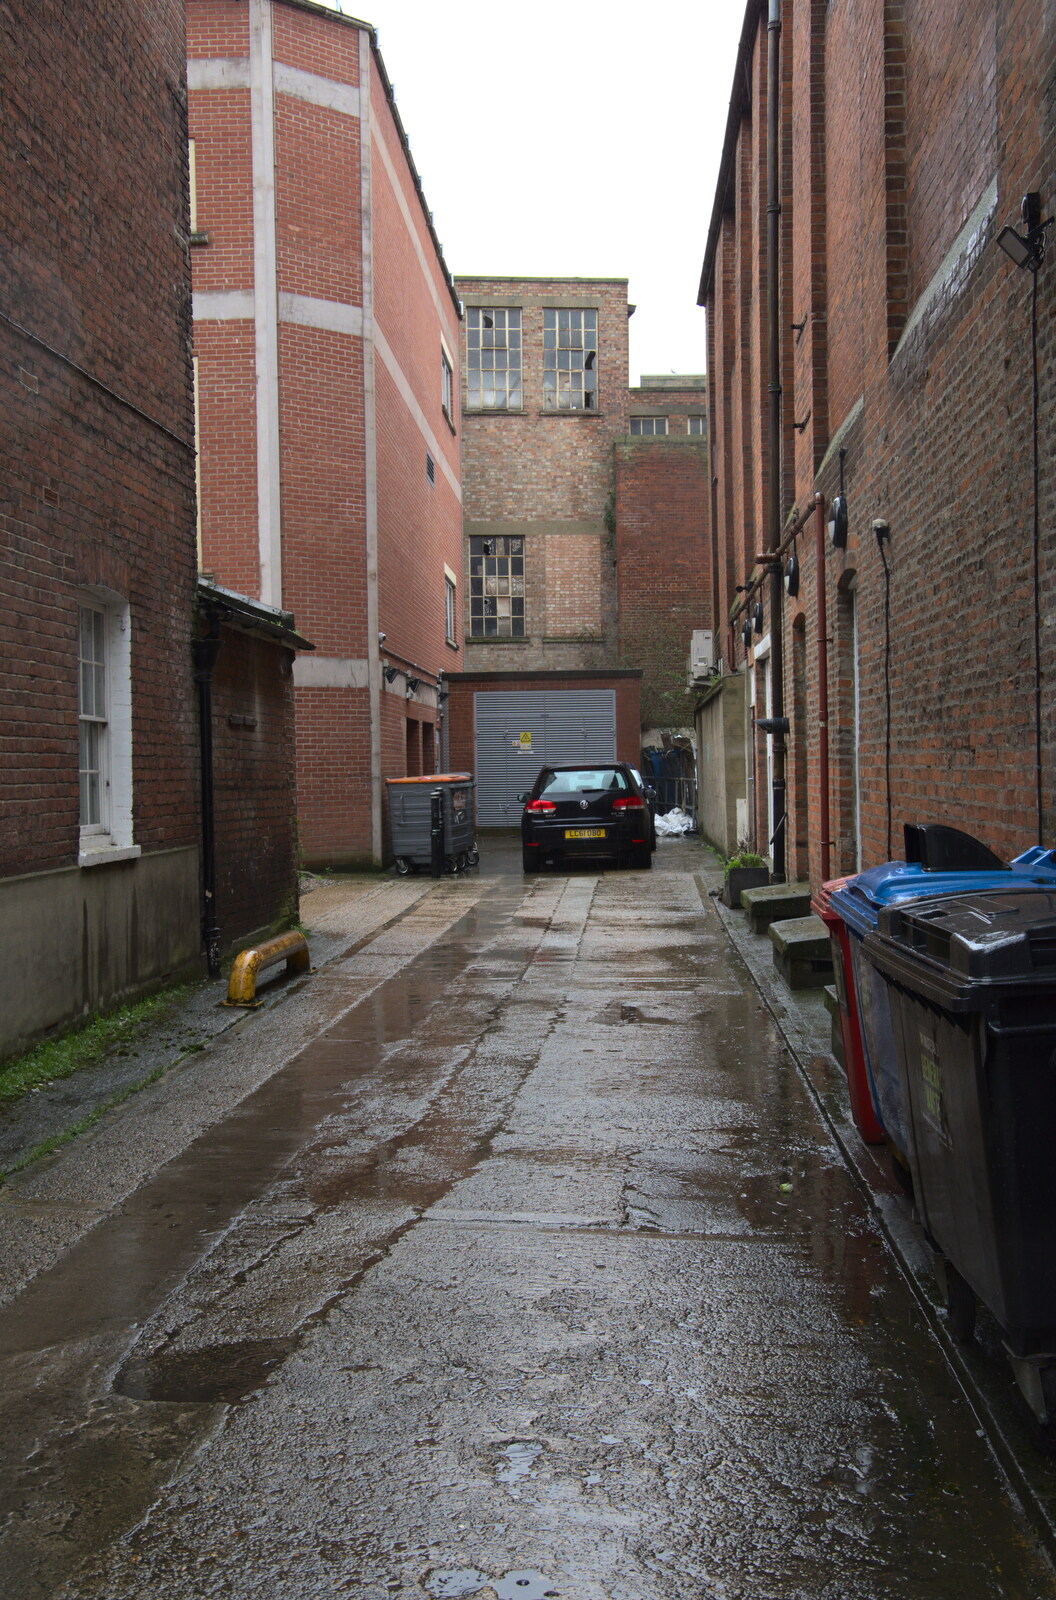 A gloomy alley off Museum Street from Fred's Flute Exam, Ipswich, Suffolk - 5th March 2020